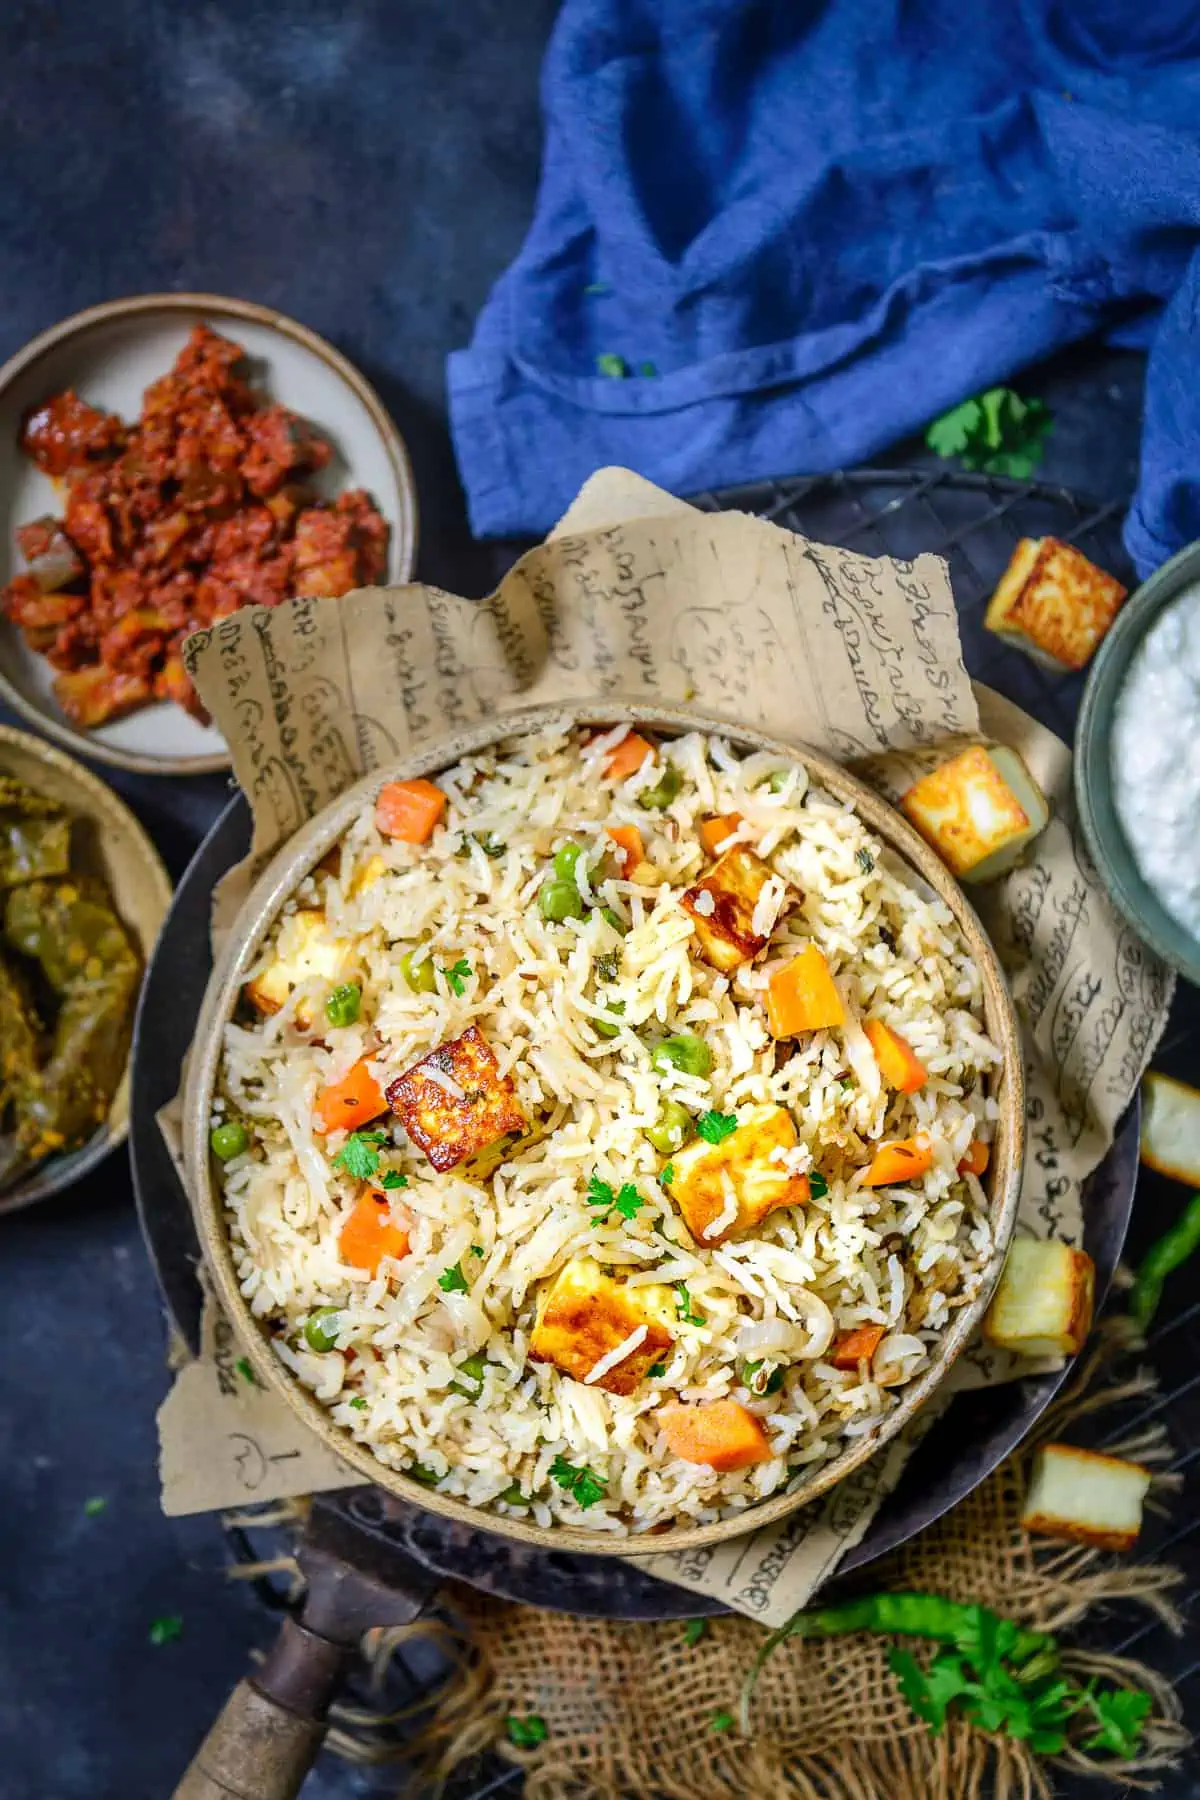 ealthy and delicious Paneer Pulao